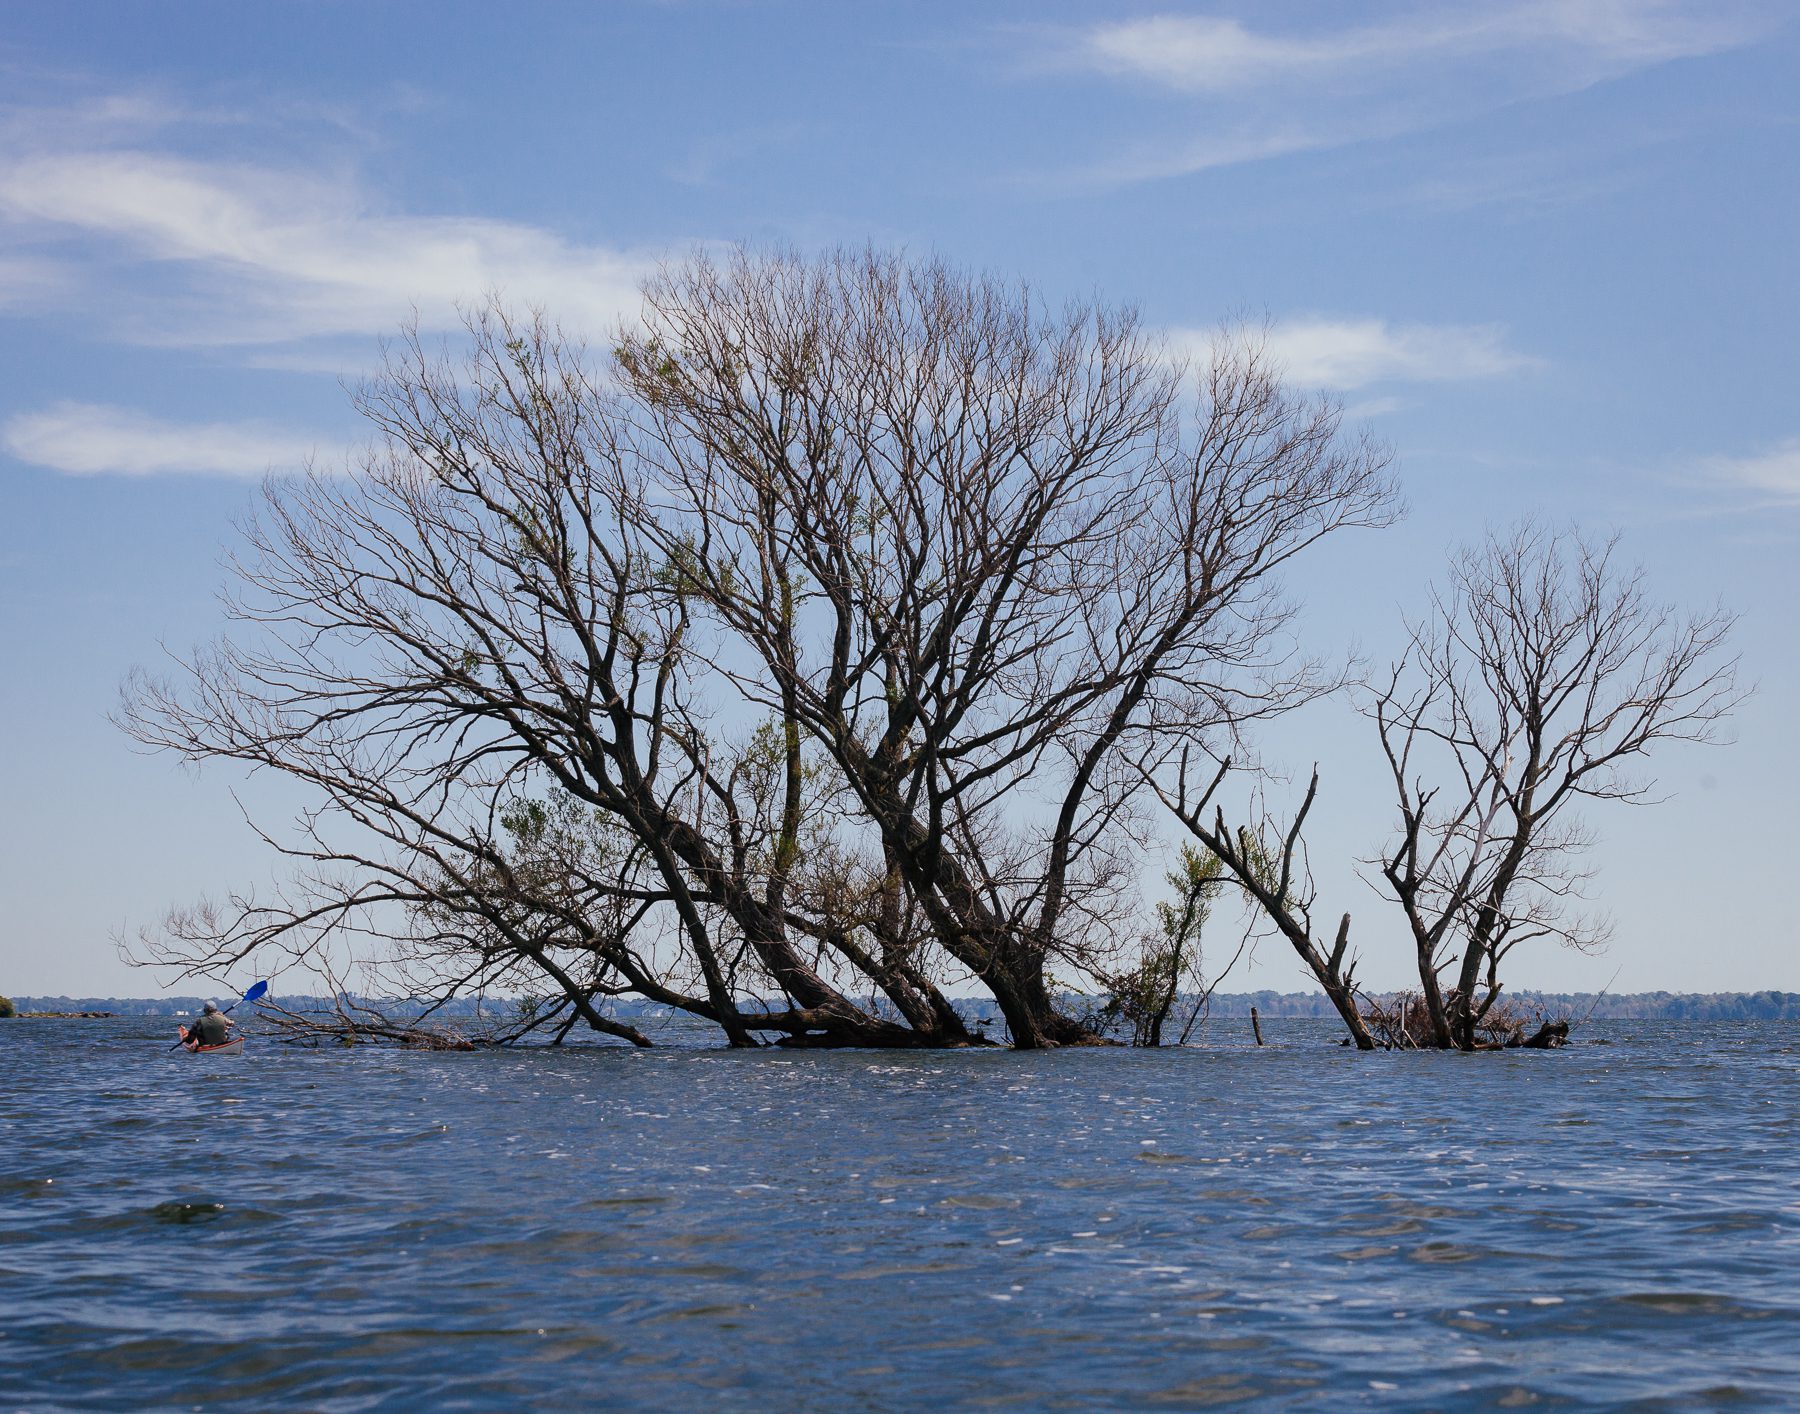 These old willows in the water used to be on a peninsula. When water levels came up, they separated from the land. “These trees are still hanging on.” 